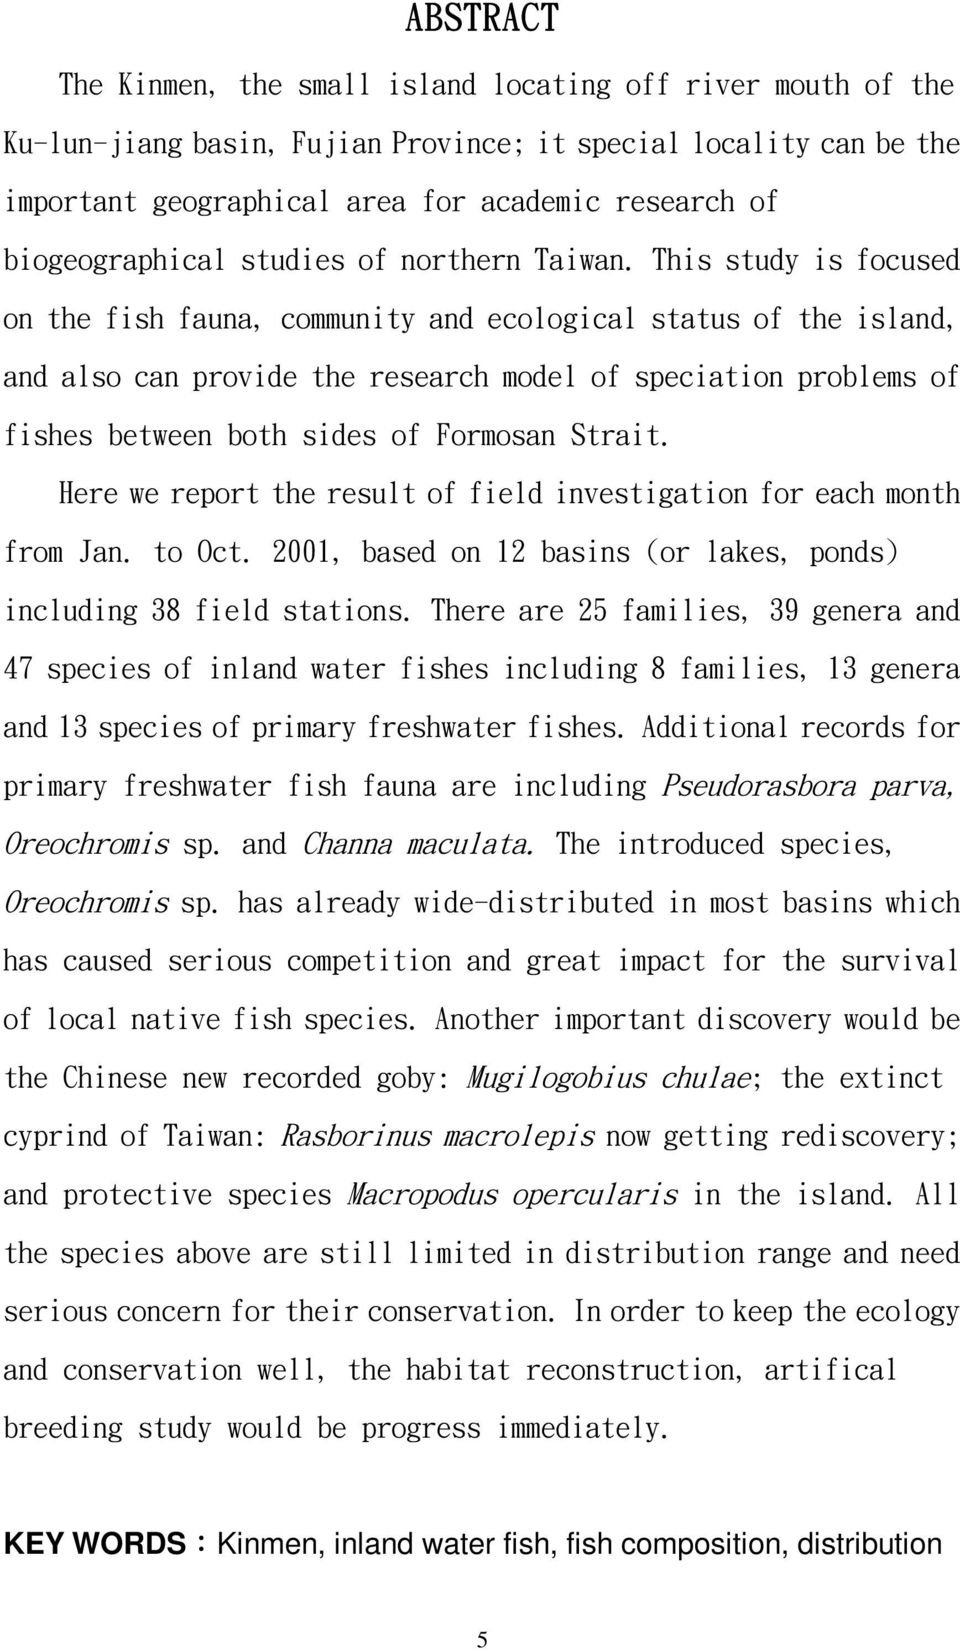 This study is focused on the fish fauna, community and ecological status of the island, and also can provide the research model of speciation problems of fishes between both sides of Formosan Strait.